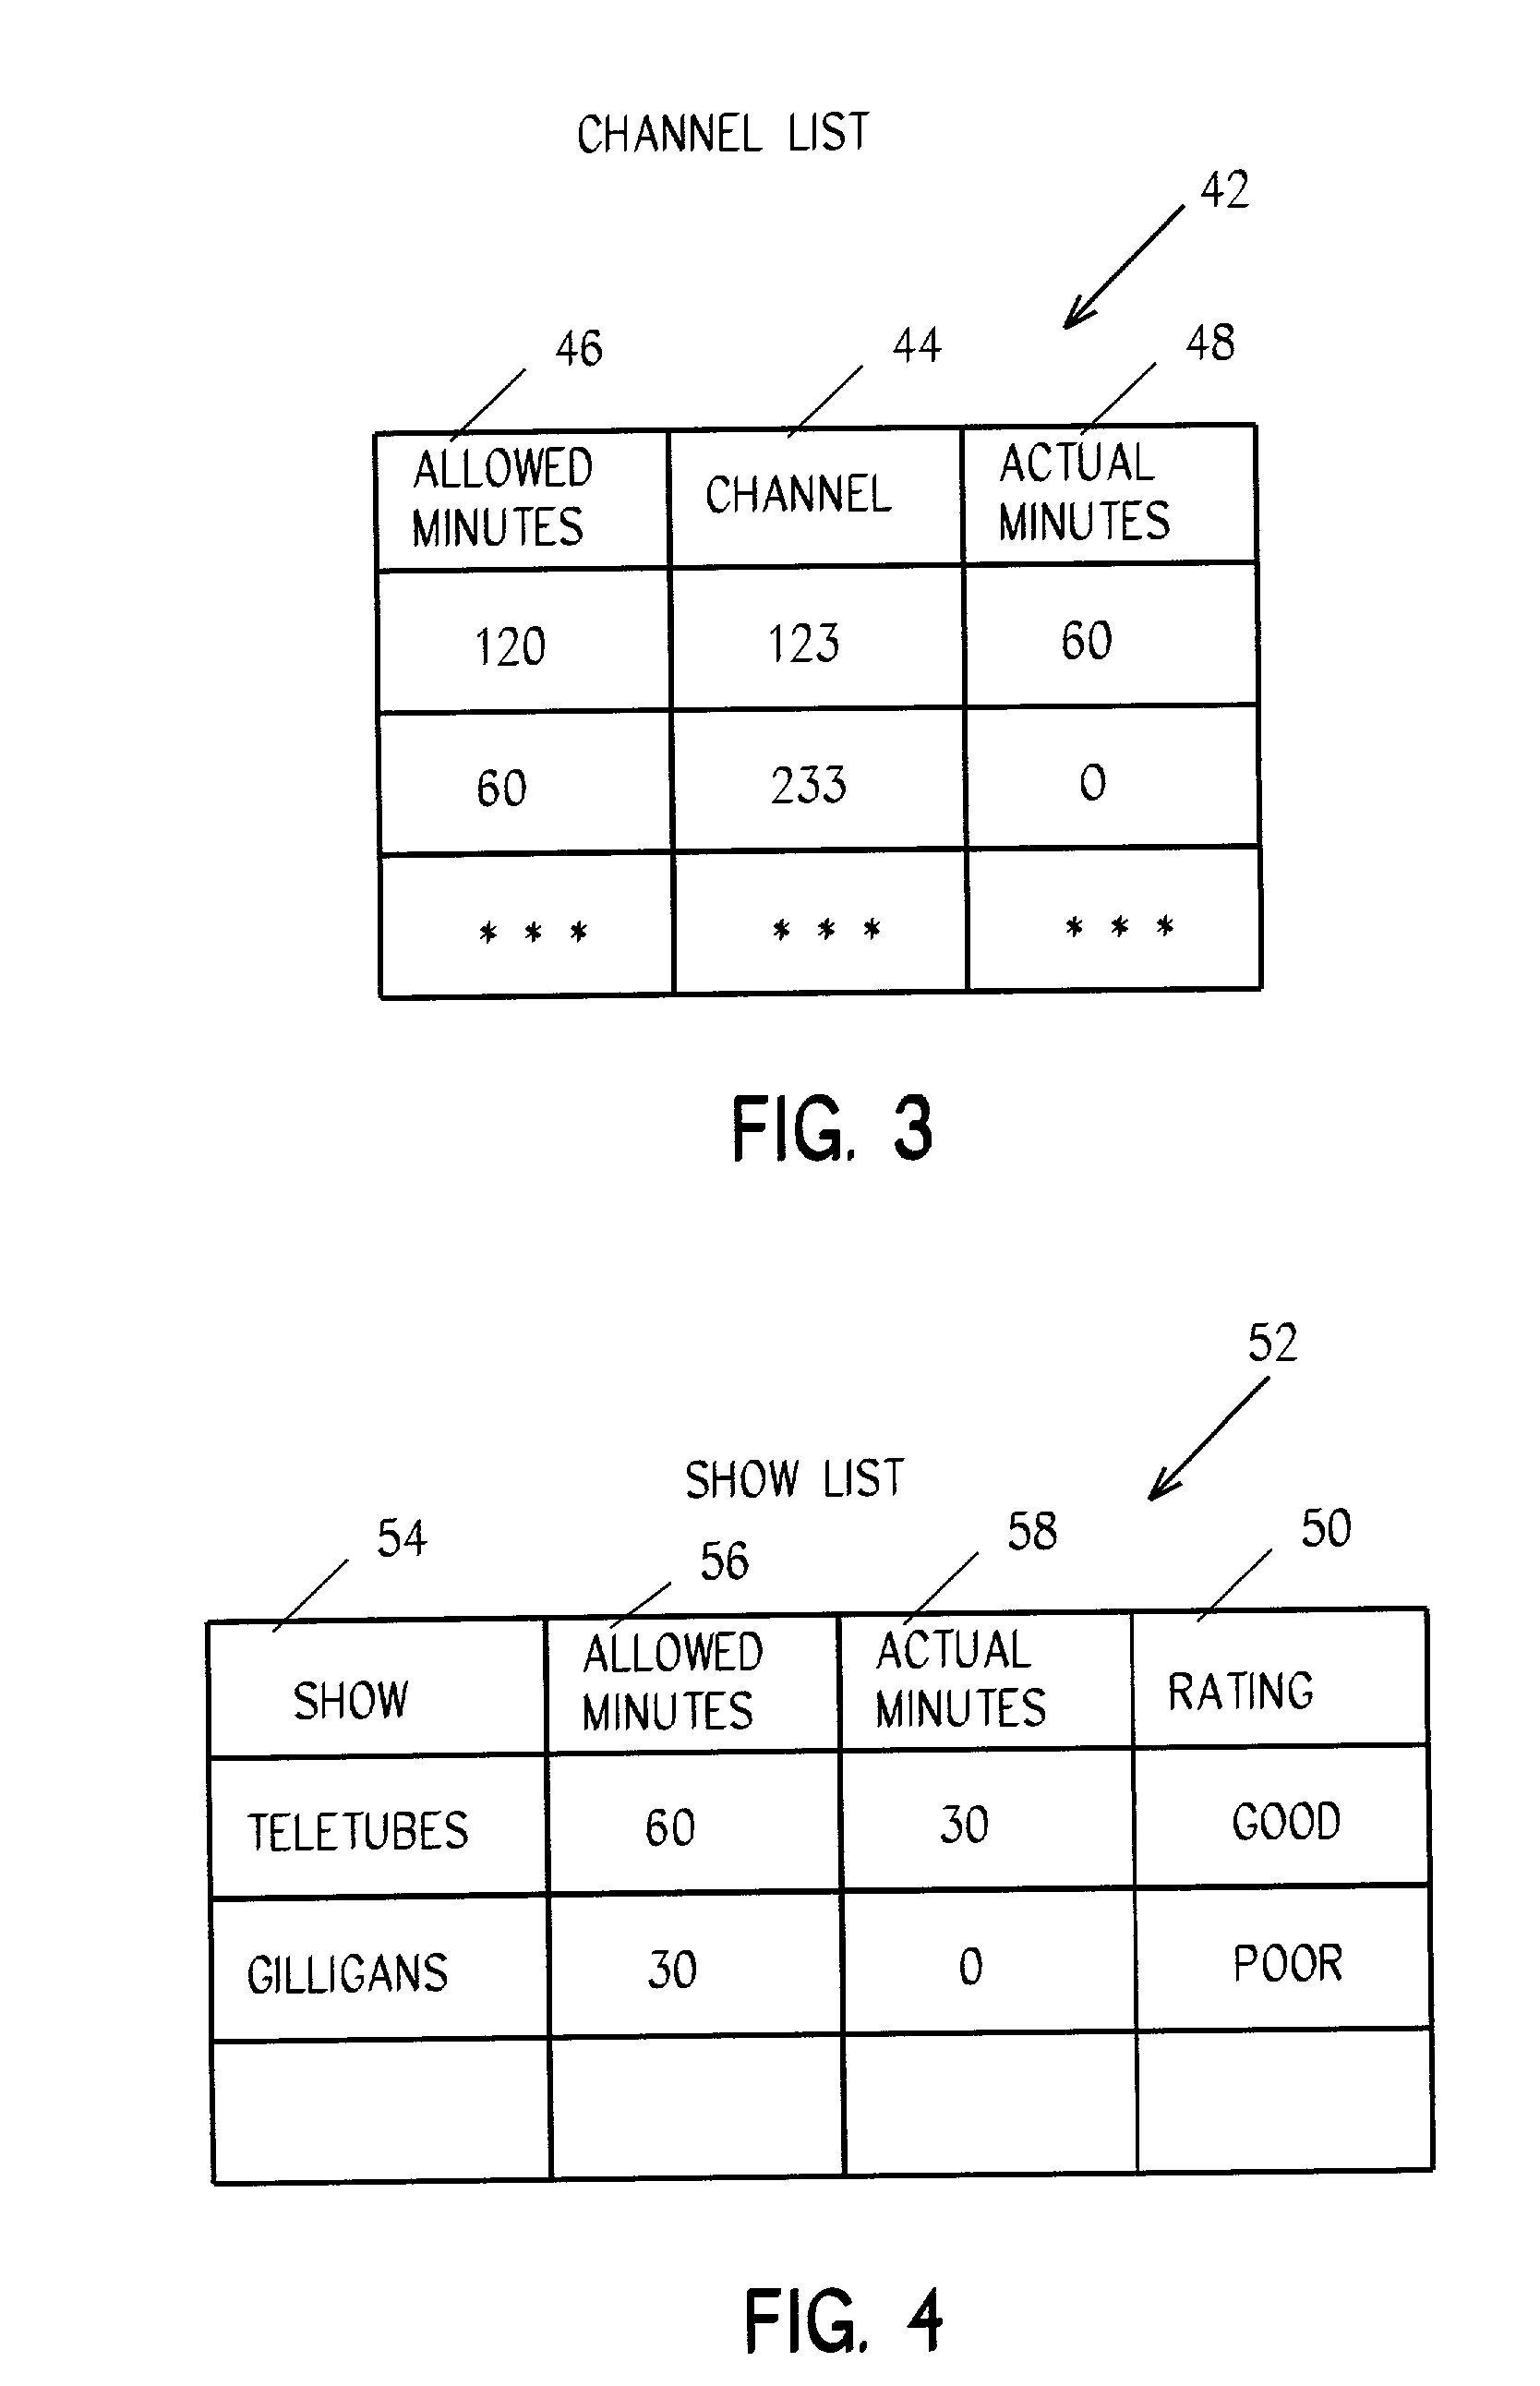 System and method for managing access to TV channels and shows